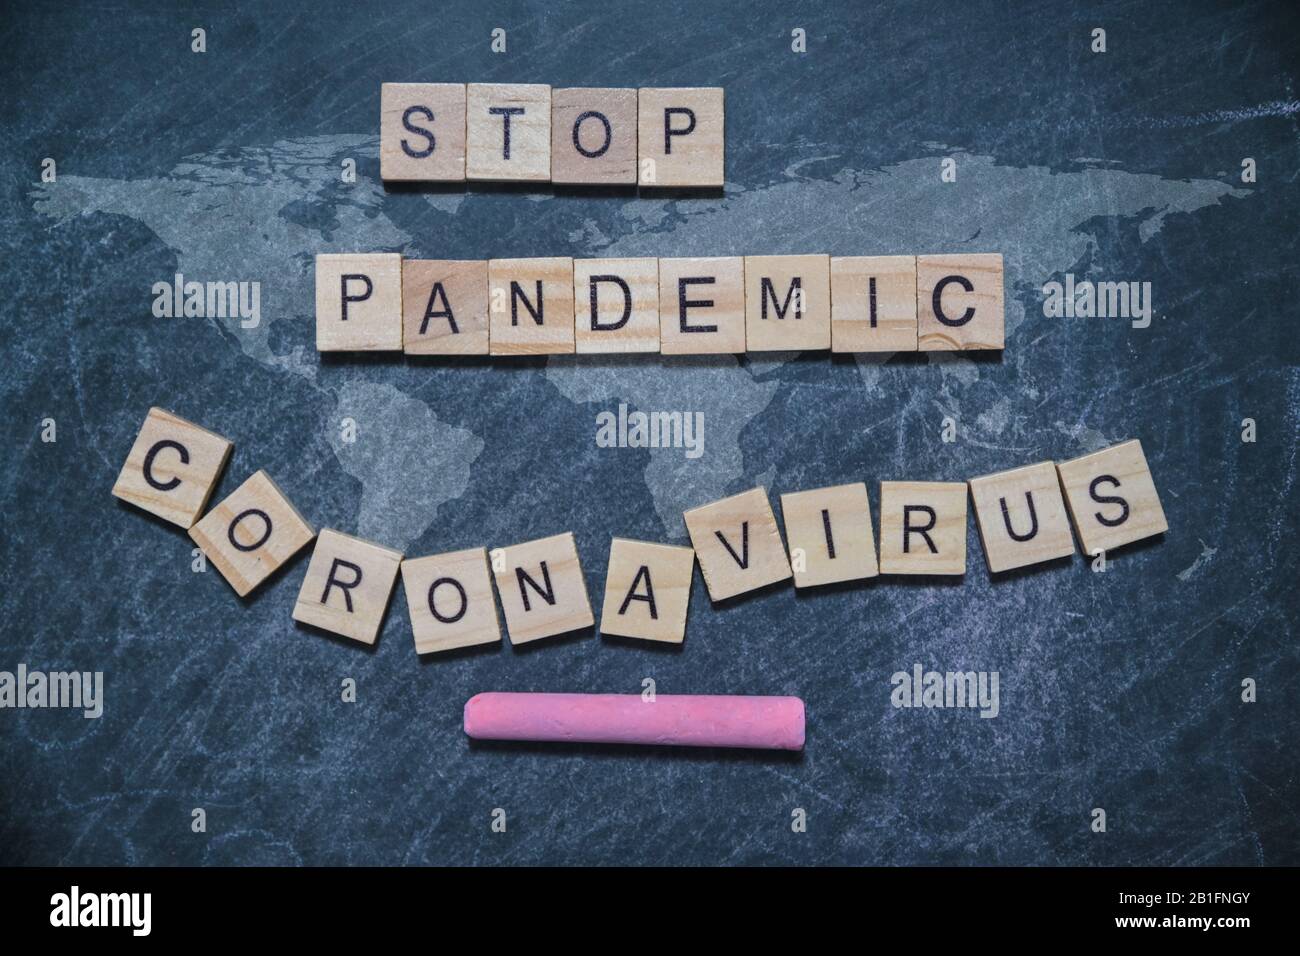 STOP pandemic corona virus word written wood block. on black board with world map calk written for your desing, top view. Stock Photo